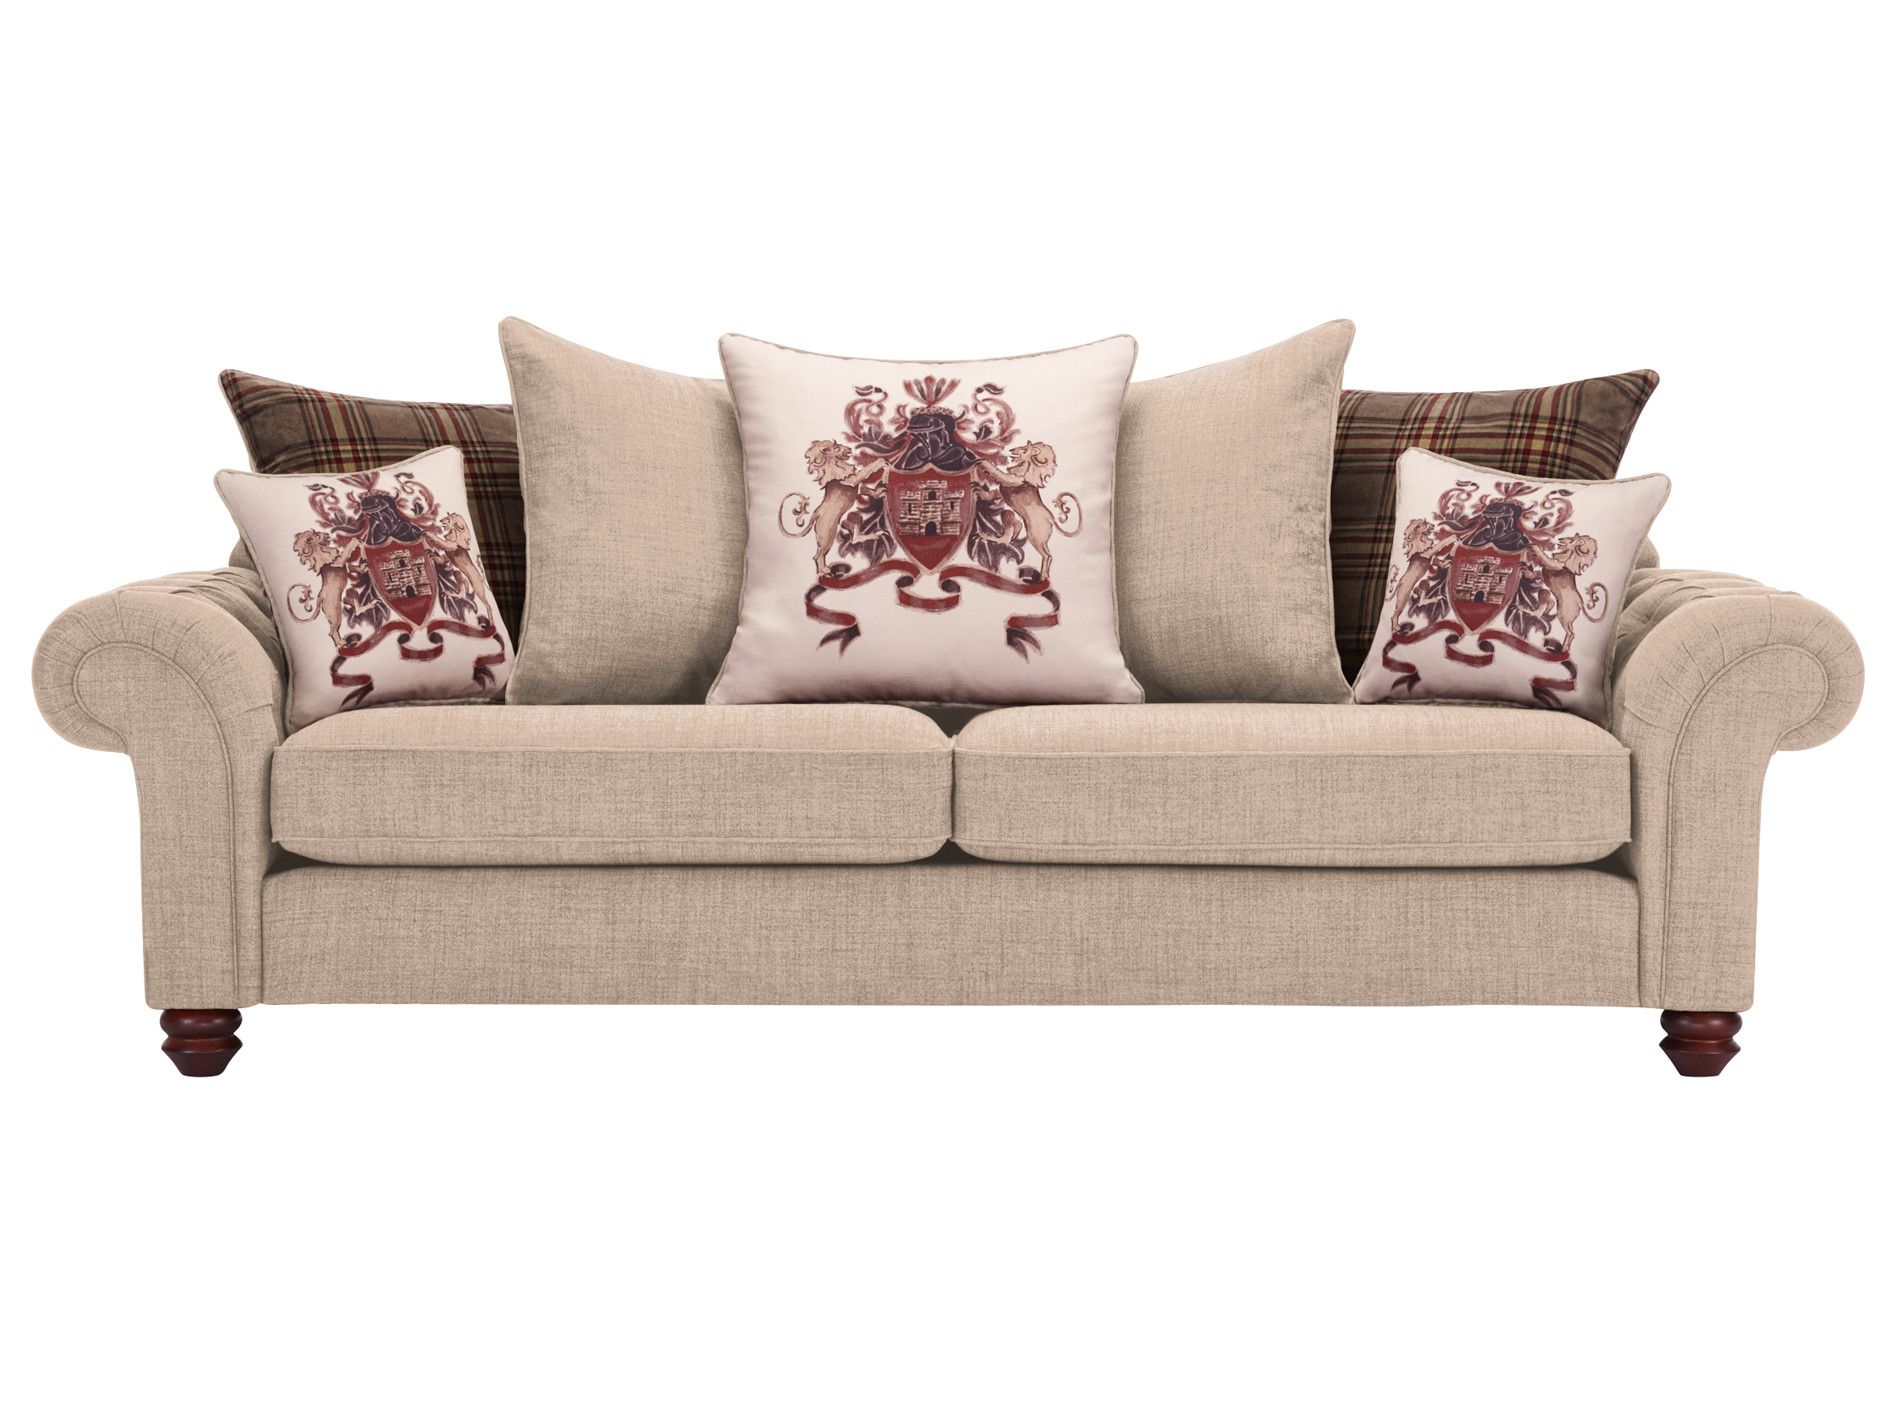 Sandringham 4 Seater Pillow Back Sofa In Beige With Brown Regarding Lyvia Pillowback Sofa Sectional Sofas (View 4 of 15)